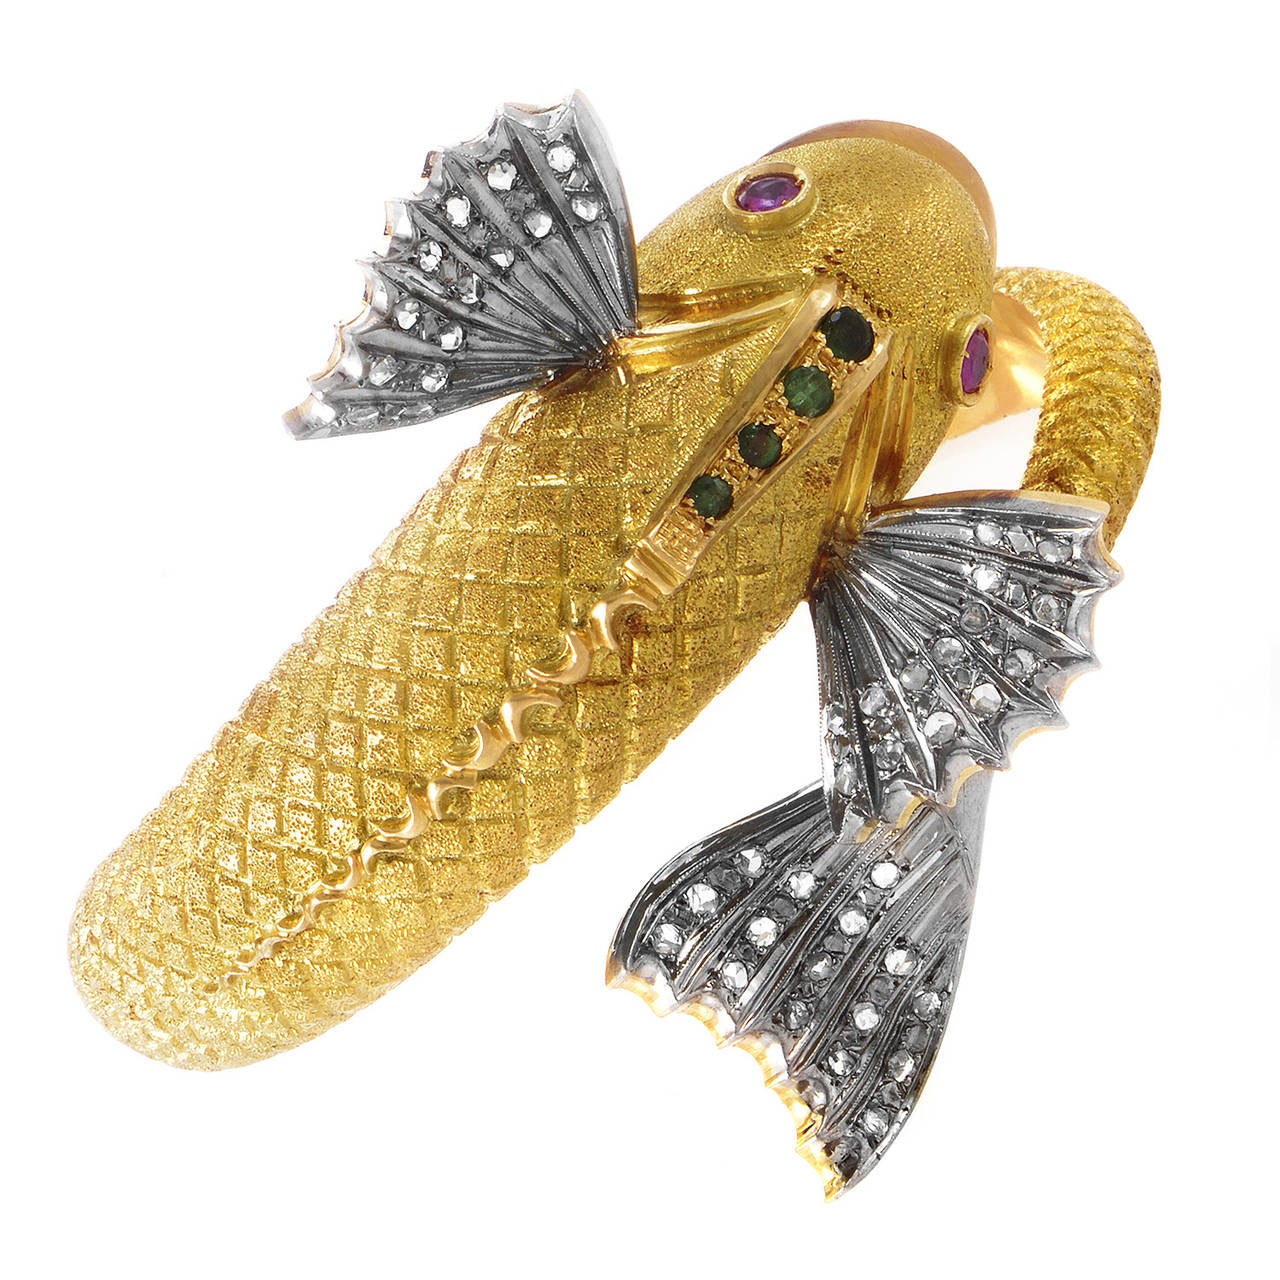 Feast your eyes upon the intricate design of this magnificent bangle bracelet. The bracelet is made primarily of 18K yellow gold, but the fish boasts white gold fins set with diamonds. Lastly, ruby eyes, and emerald accents complete this decadent